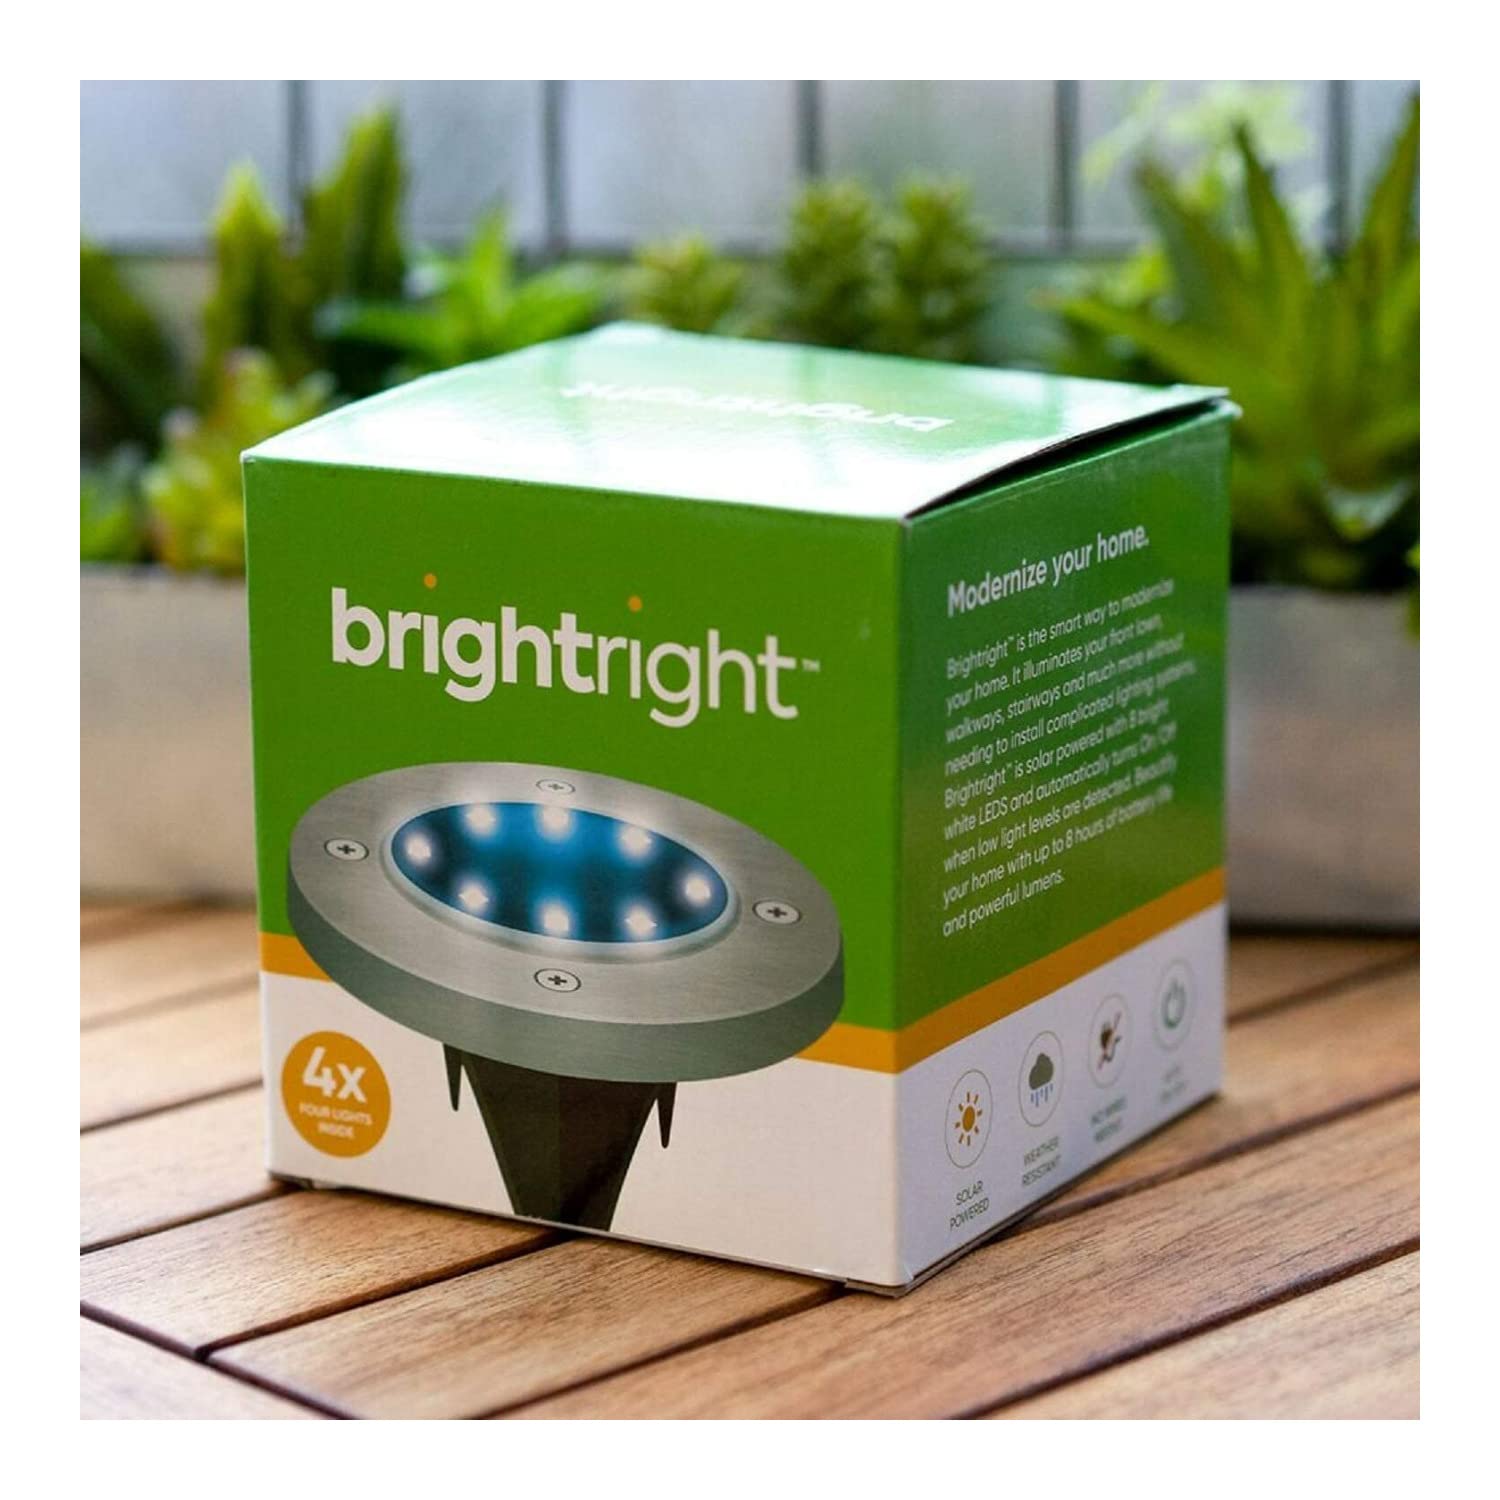 BRIGHTRIGHT Bright Right Solar Outdoor Lights (4 Lights) - White LED Weatherproof Outdoor Ground Lights for Landscape, Garden, Patio, Lawn, Deck, Pathway & Driveway